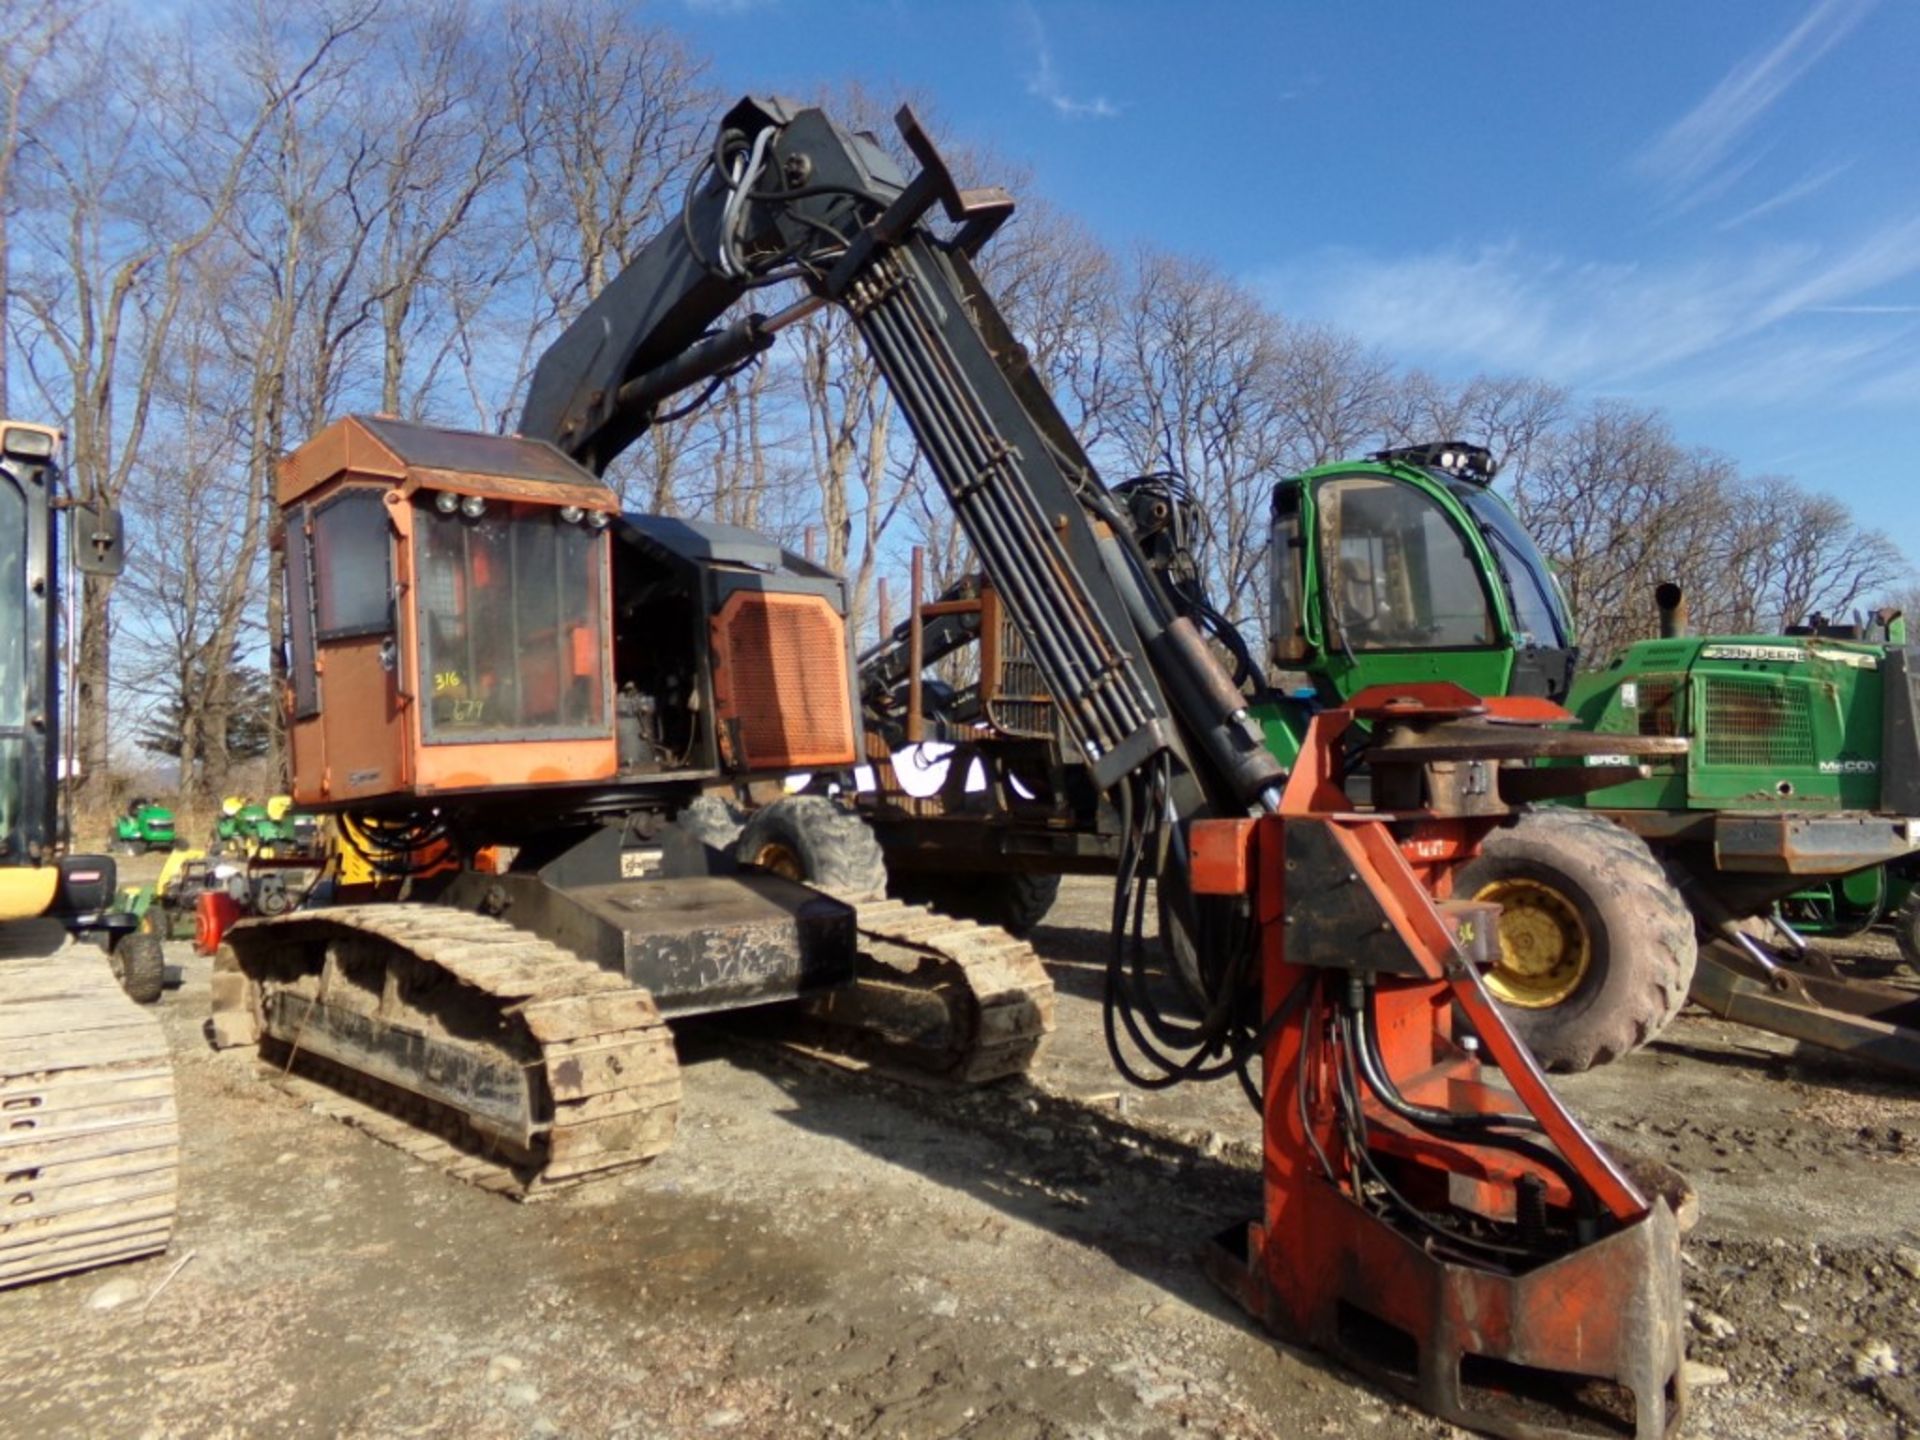 Timbco Equipment Tree Buncher, 7544 Hours, Right Side Drive Has Issues